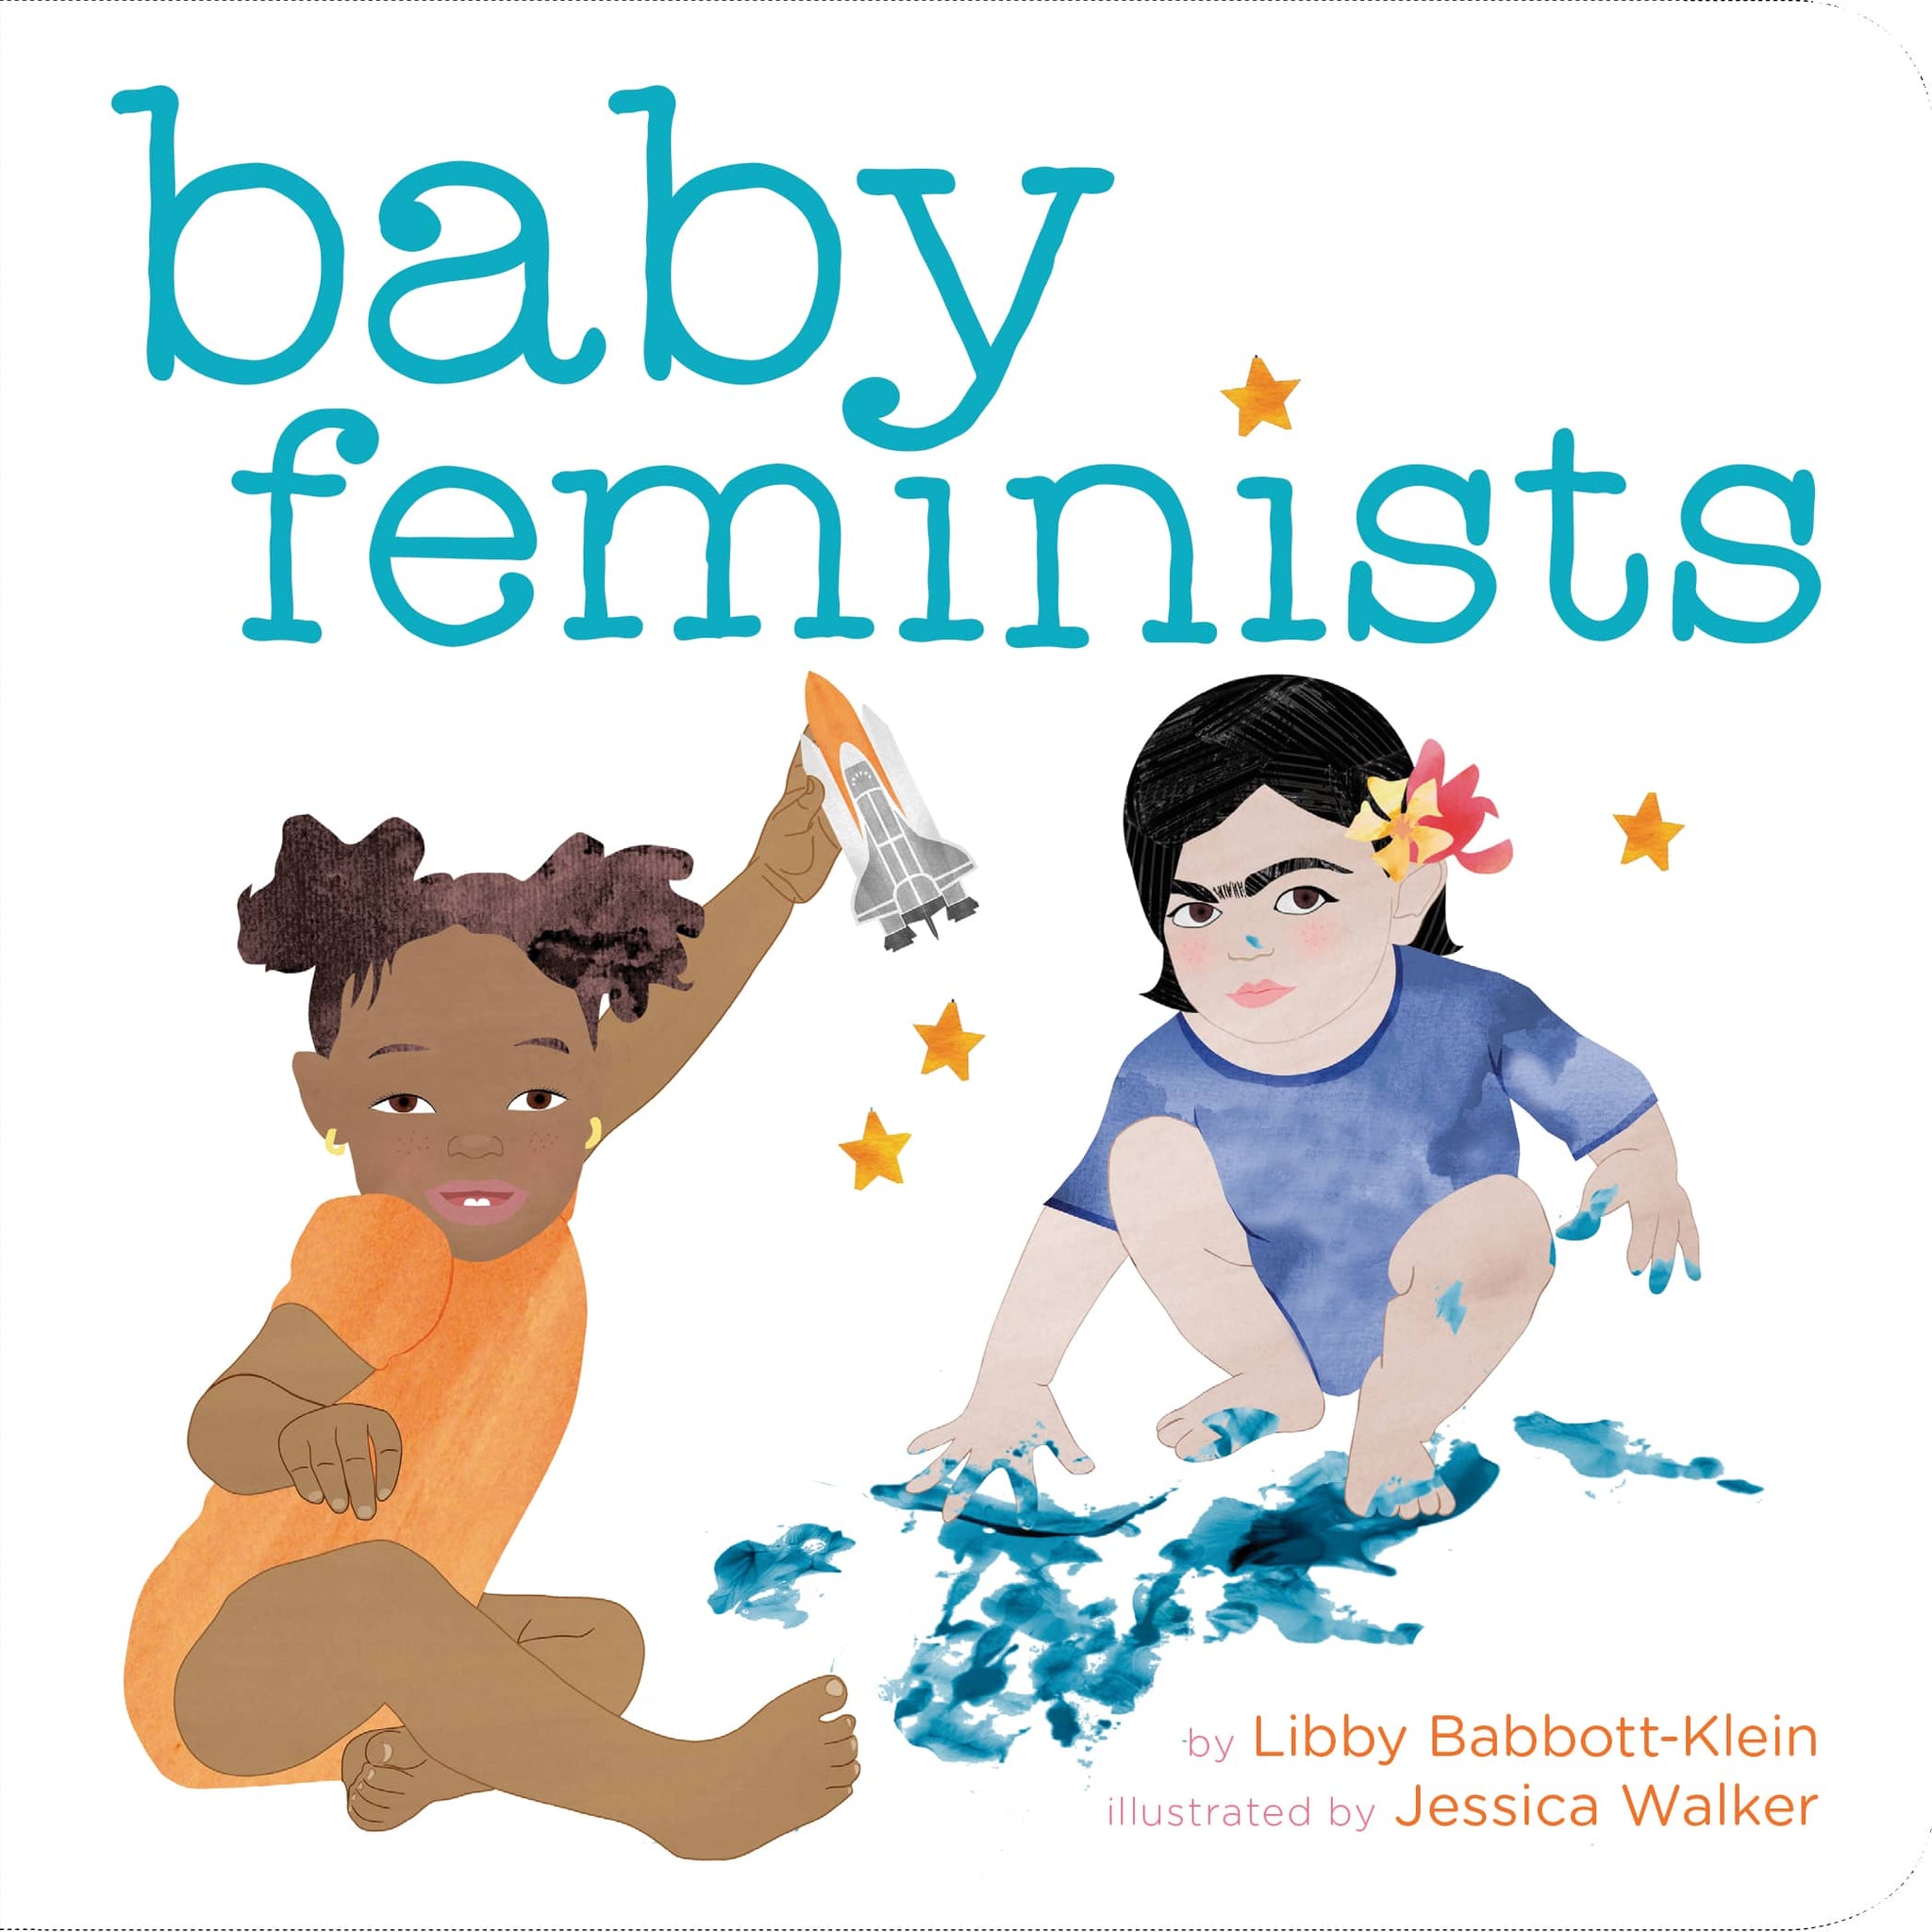 Baby Feminists by Libby Babbott-Klein and Jessica Walker